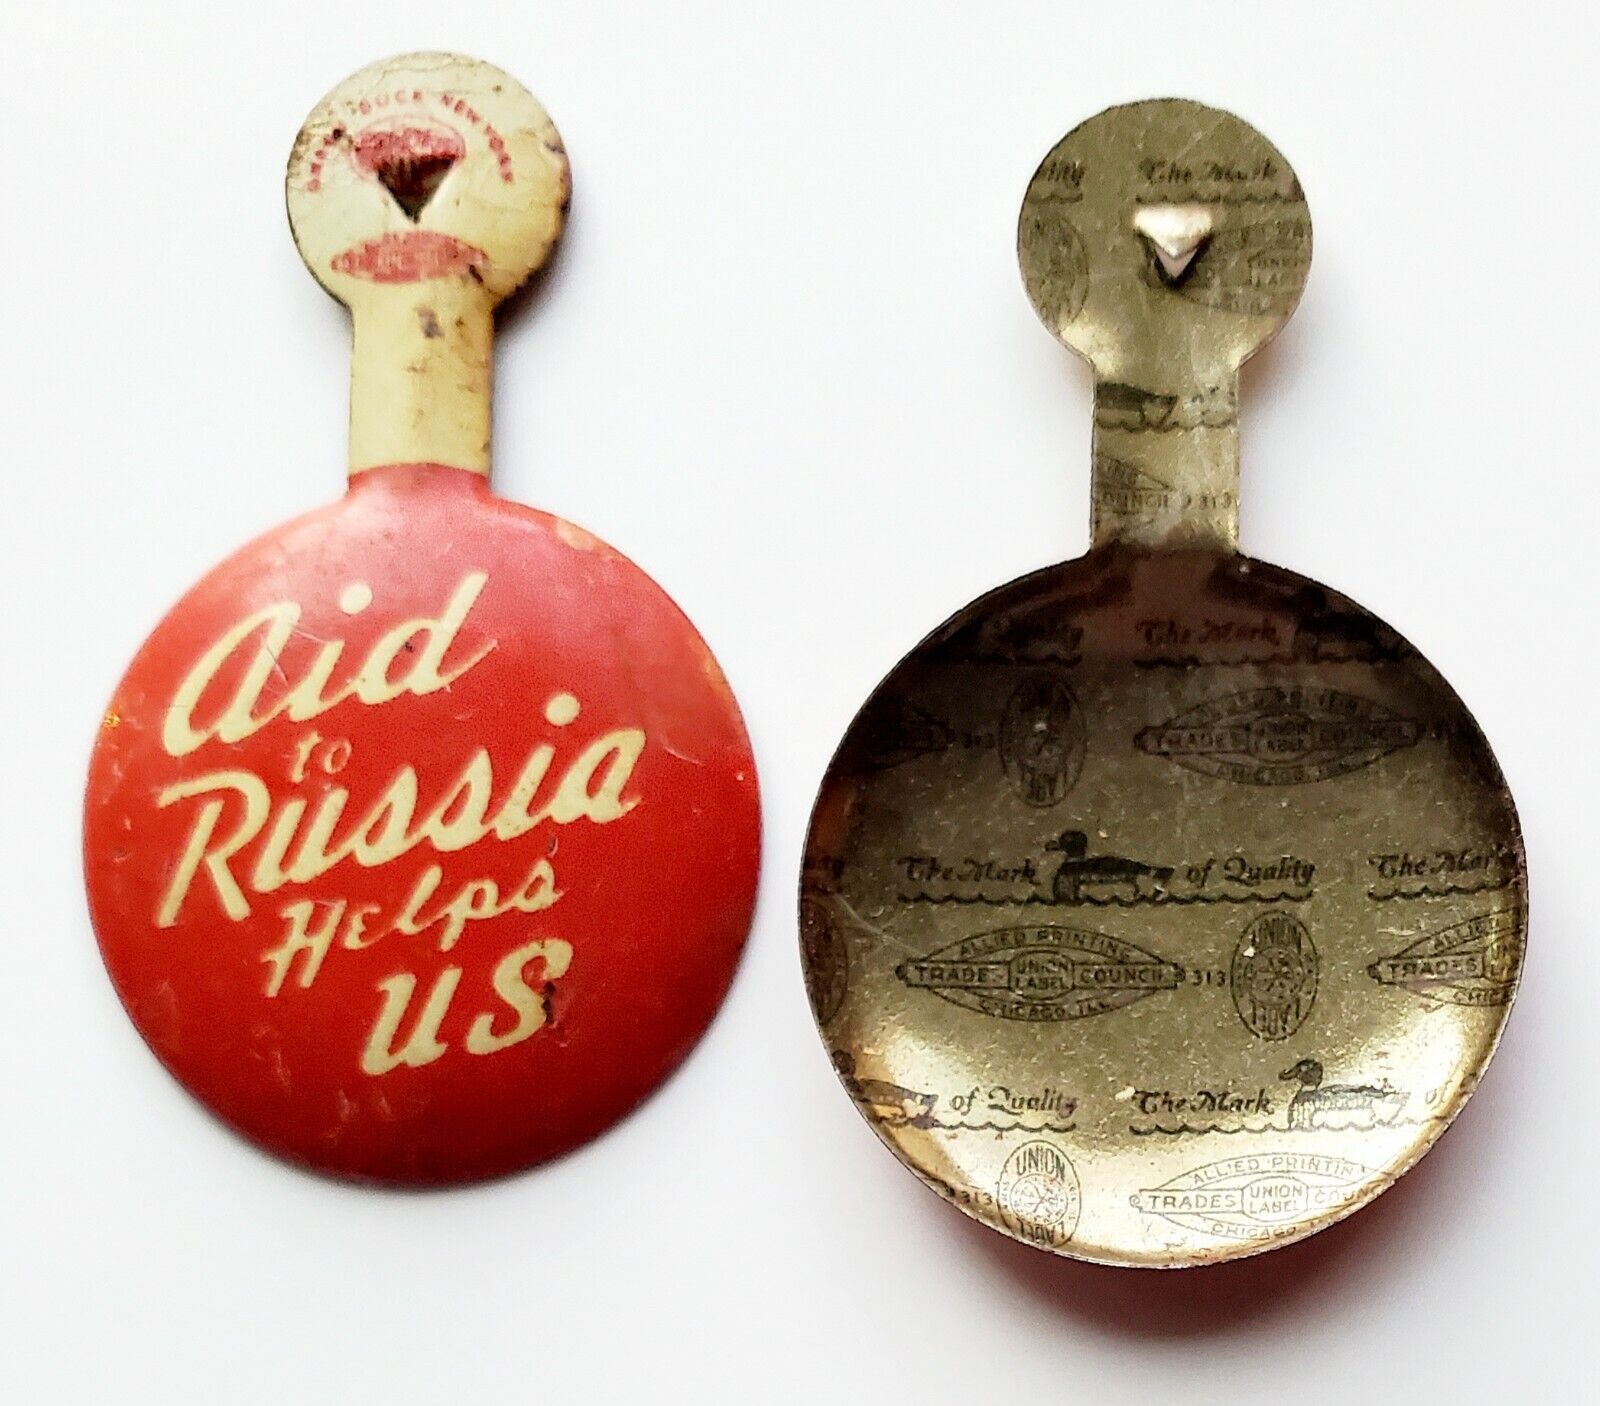 Original Vintage WWII Aid to Russia Helps US Pin Button Greenback